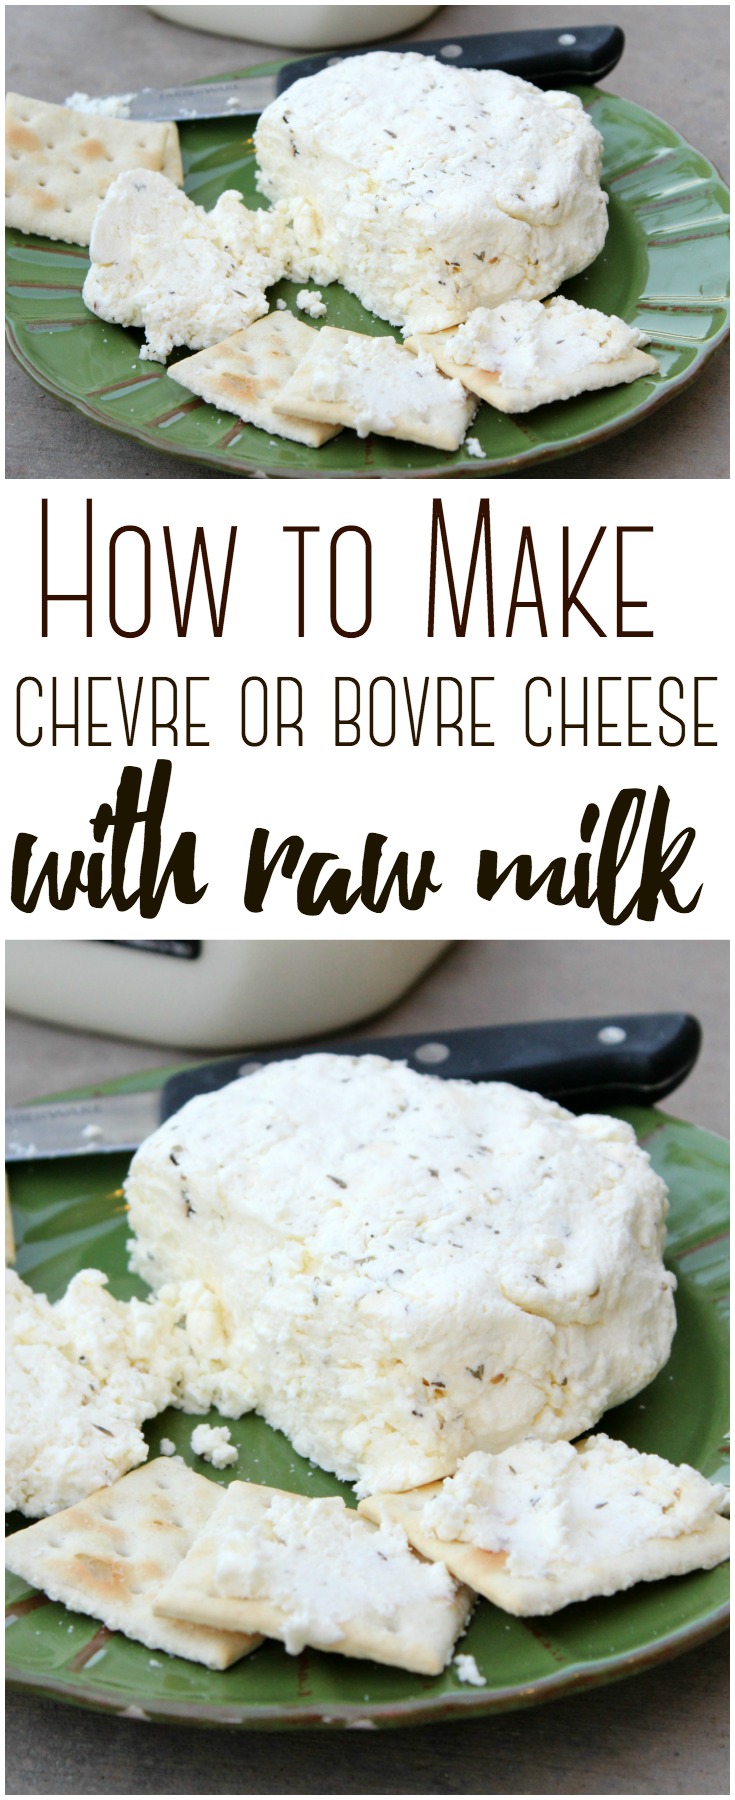 Bovre Cheese (much like homemade chevre cheese is super delicious - and easy to make at home with a gallon of raw cow milk.